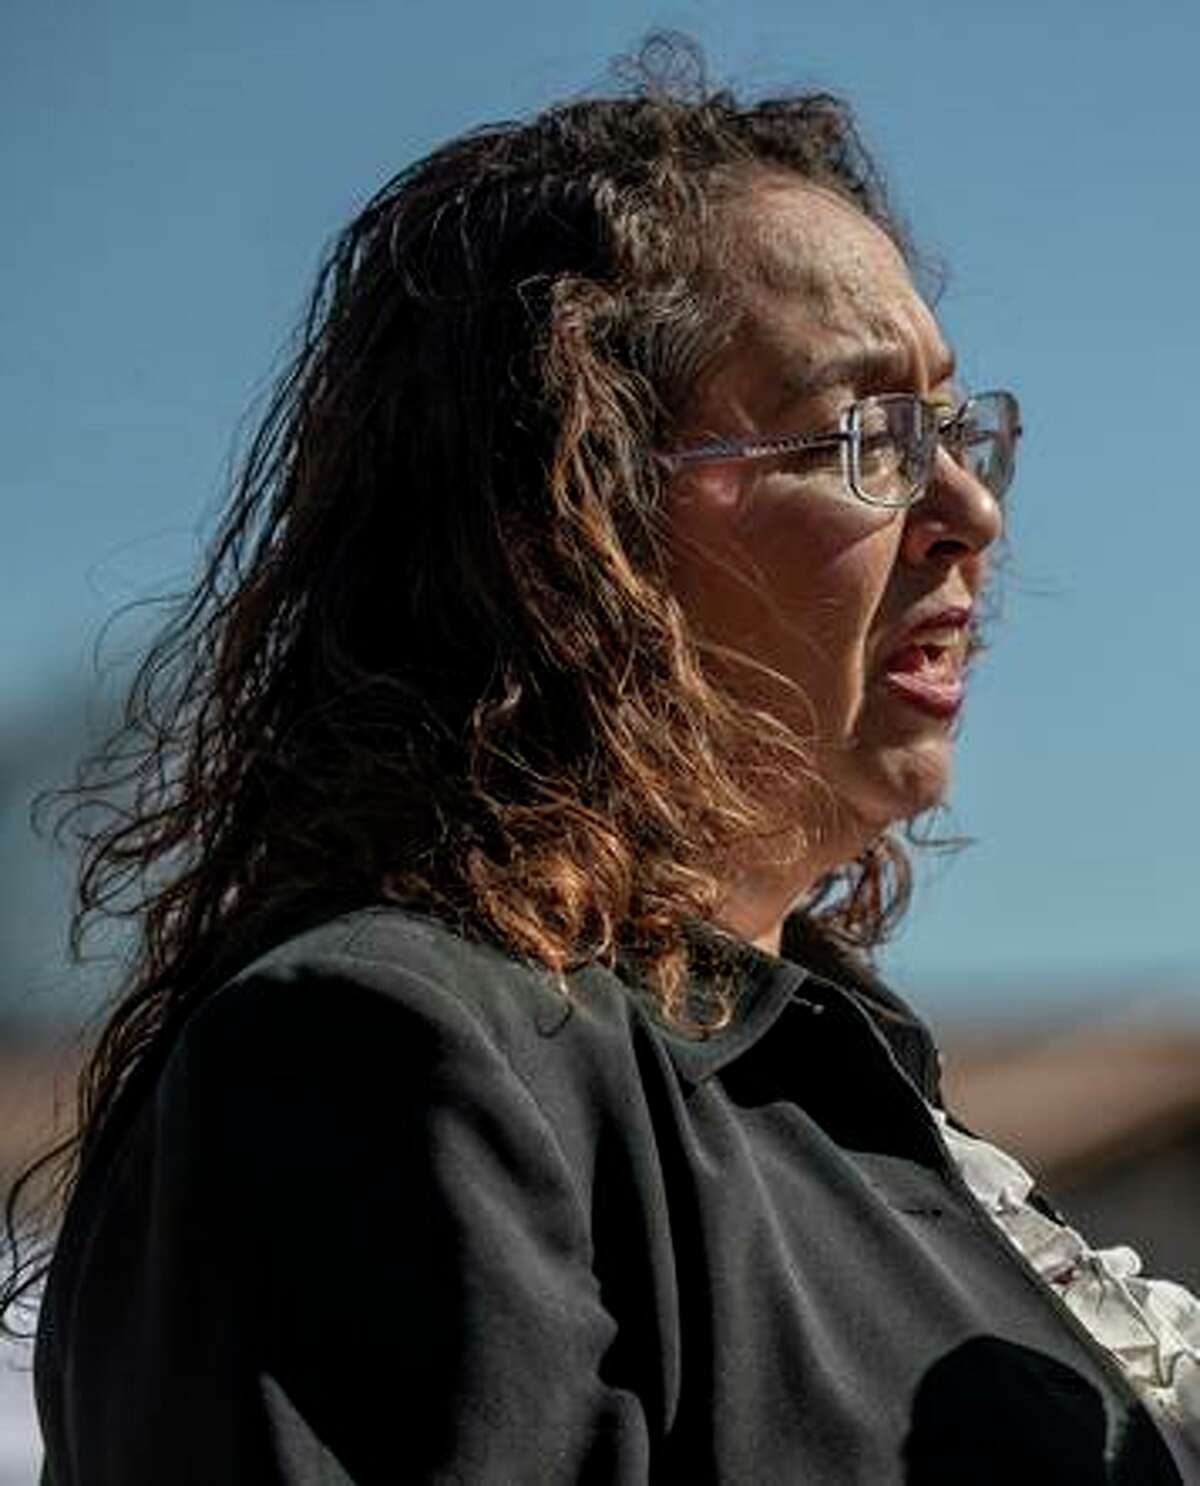 The shooting Saturday happened outside the home of Gilroy City Council Member Rebeca Armendariz, pictured in February.